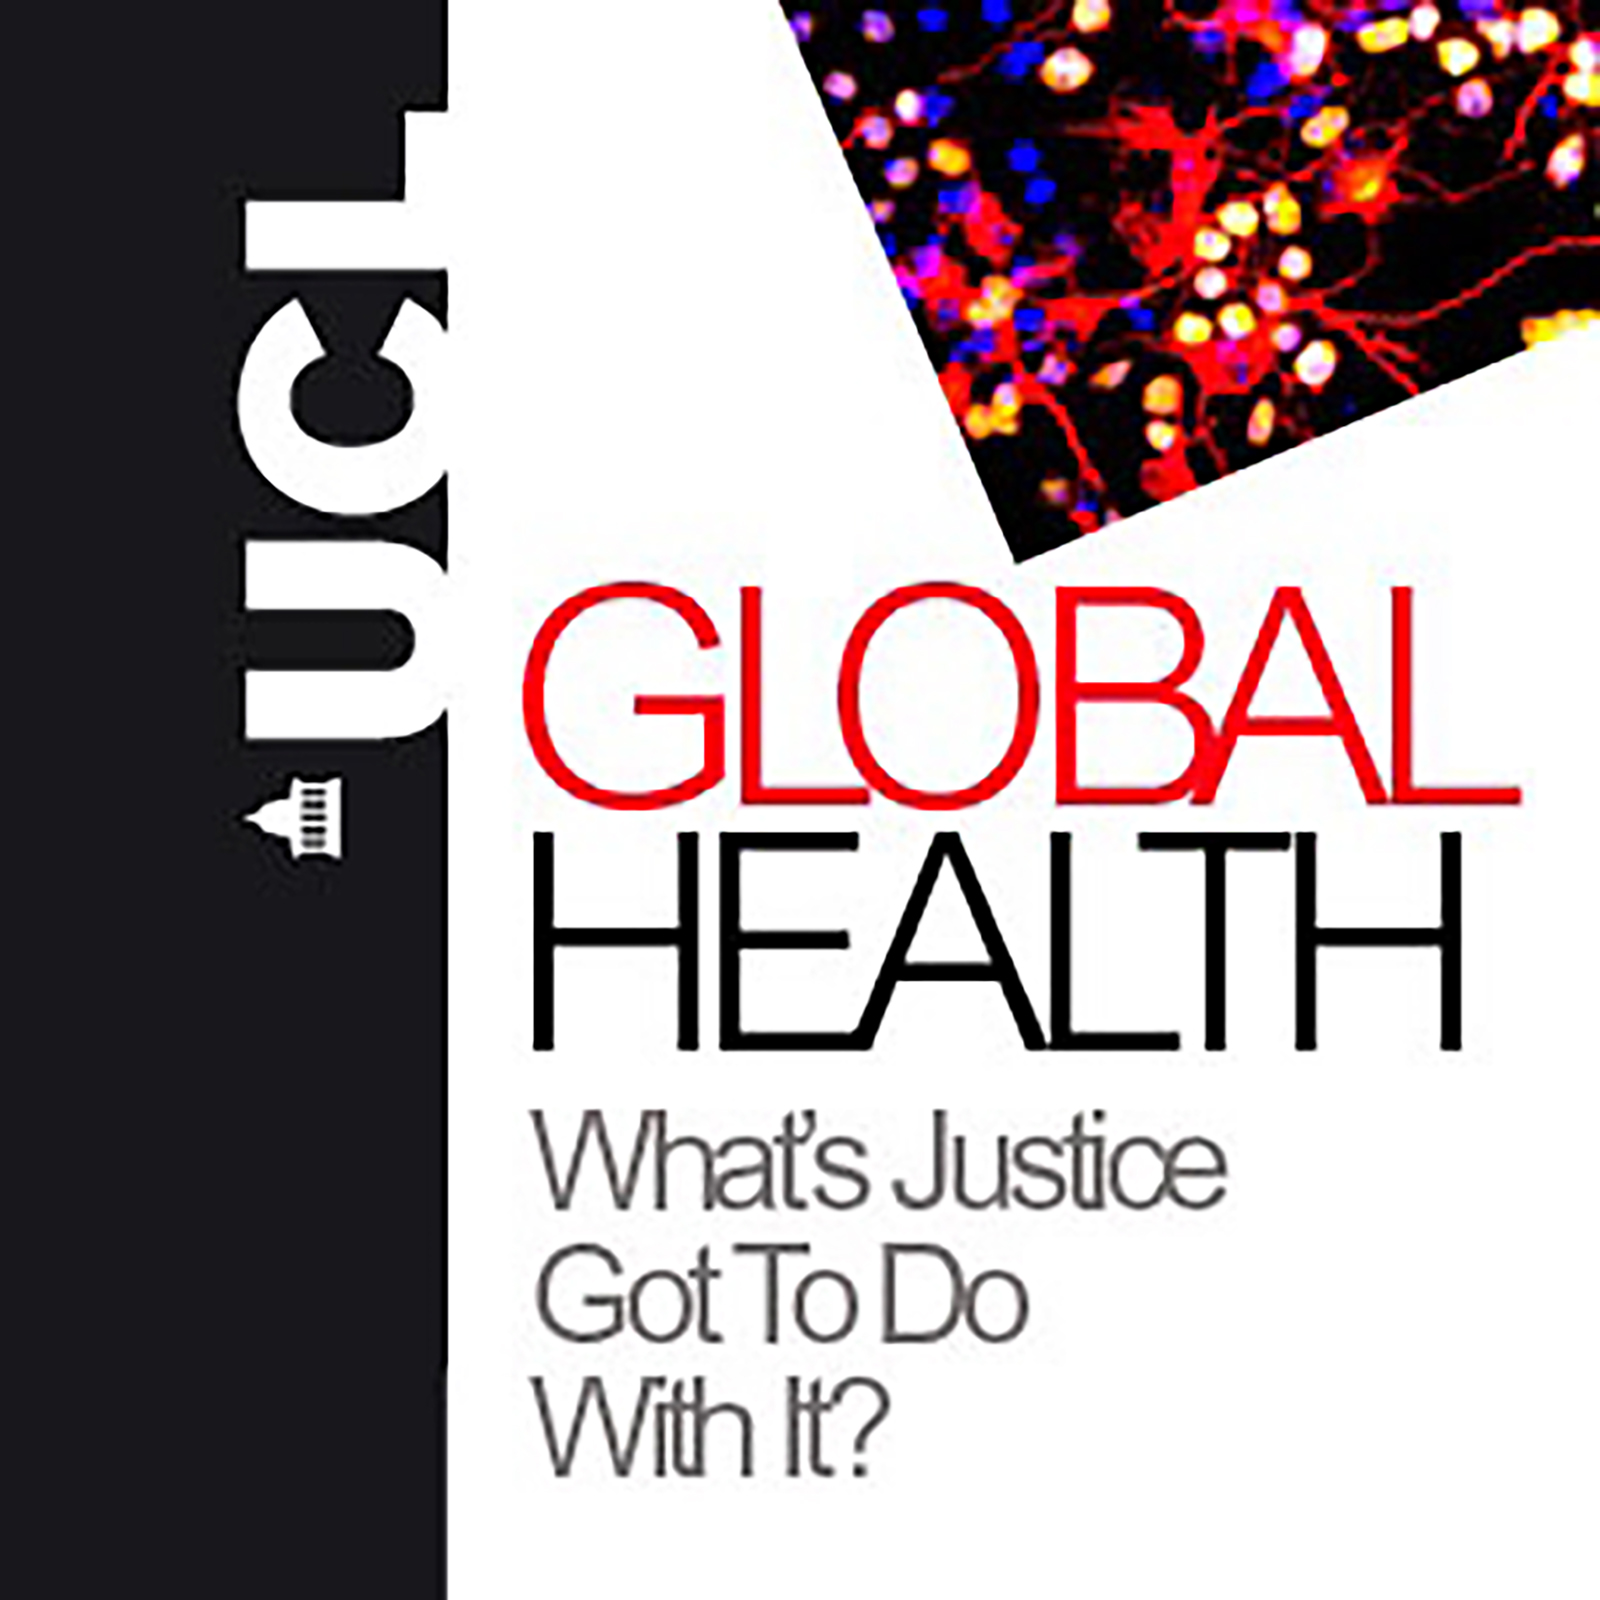 Global Health: What's Justice got to do with it? Part 2